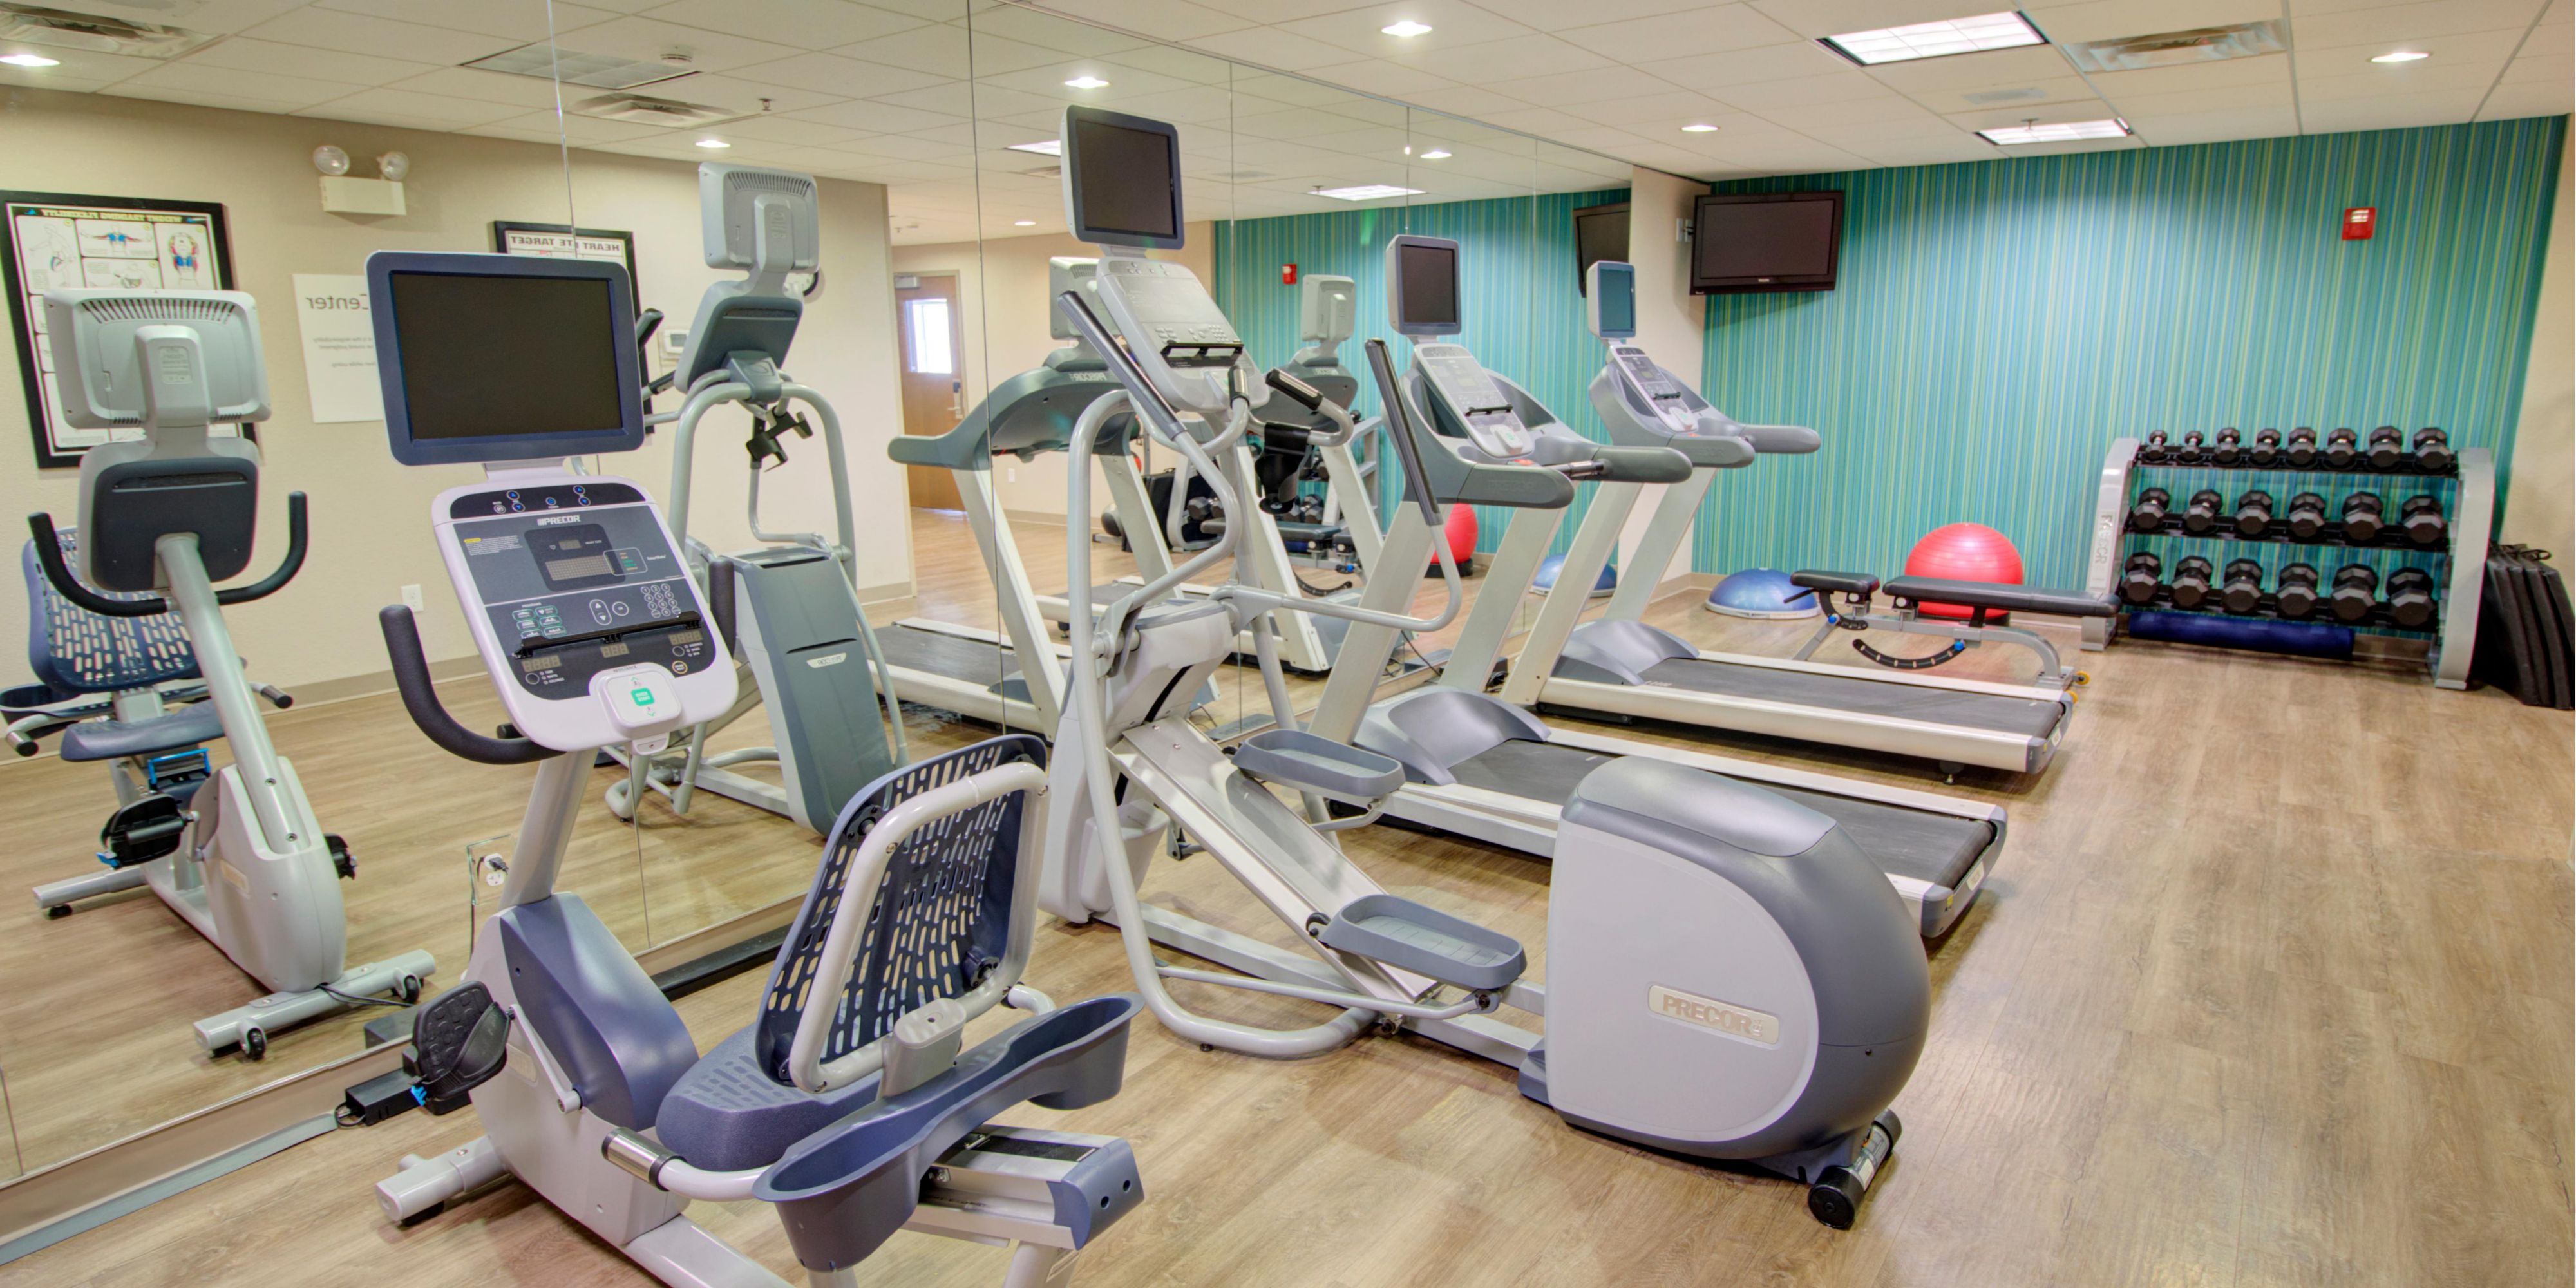 Check out our newly renovated fitness facility with Precor equipment and free weights!